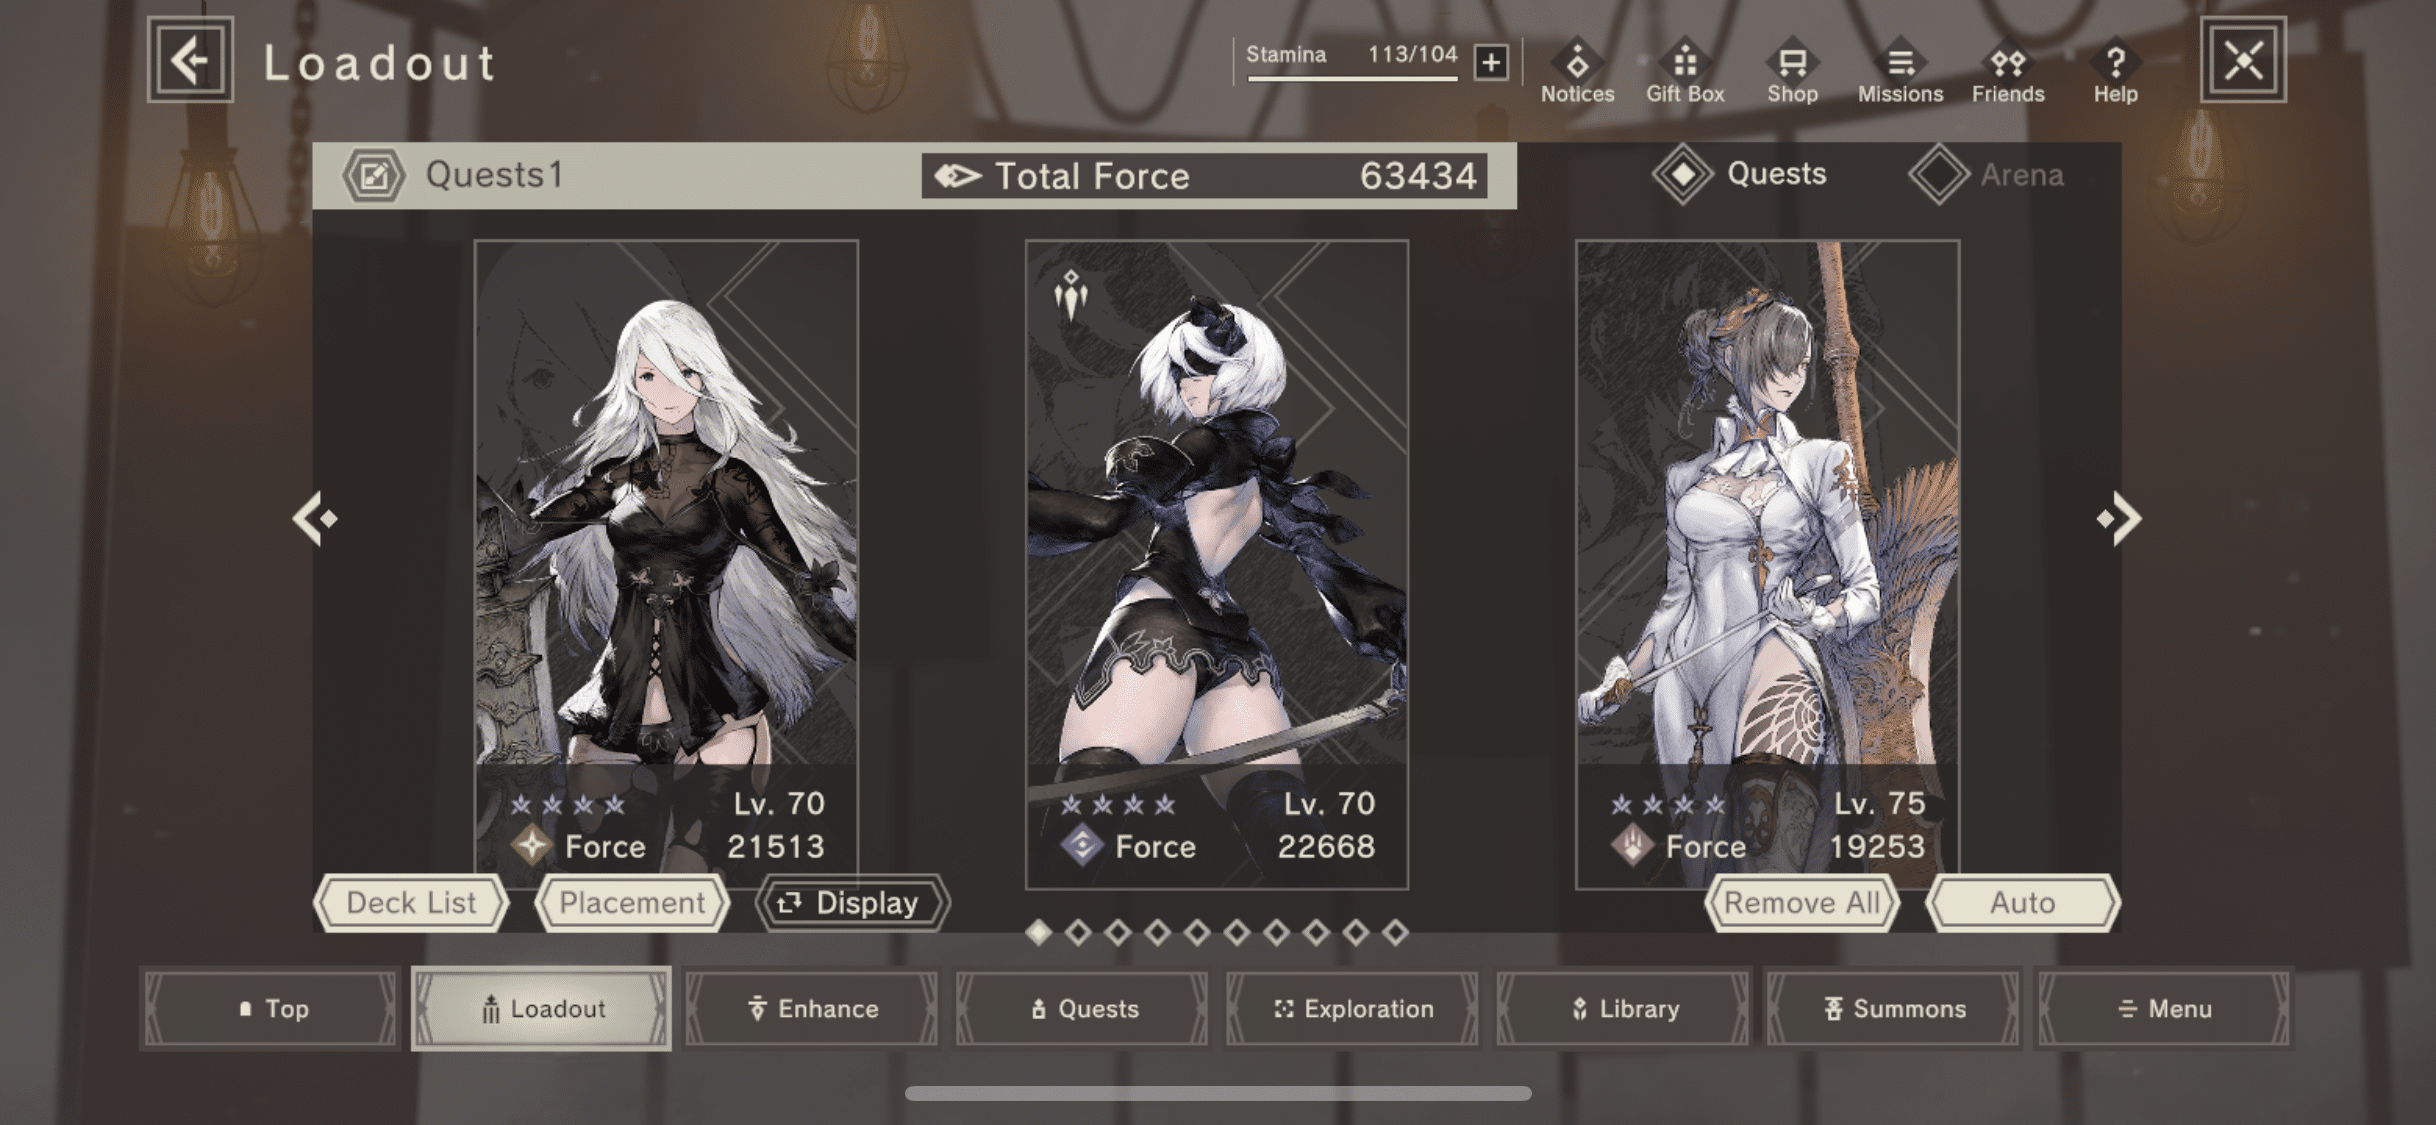 How to Quickly Earn Gold in NieR Reincarnation 3